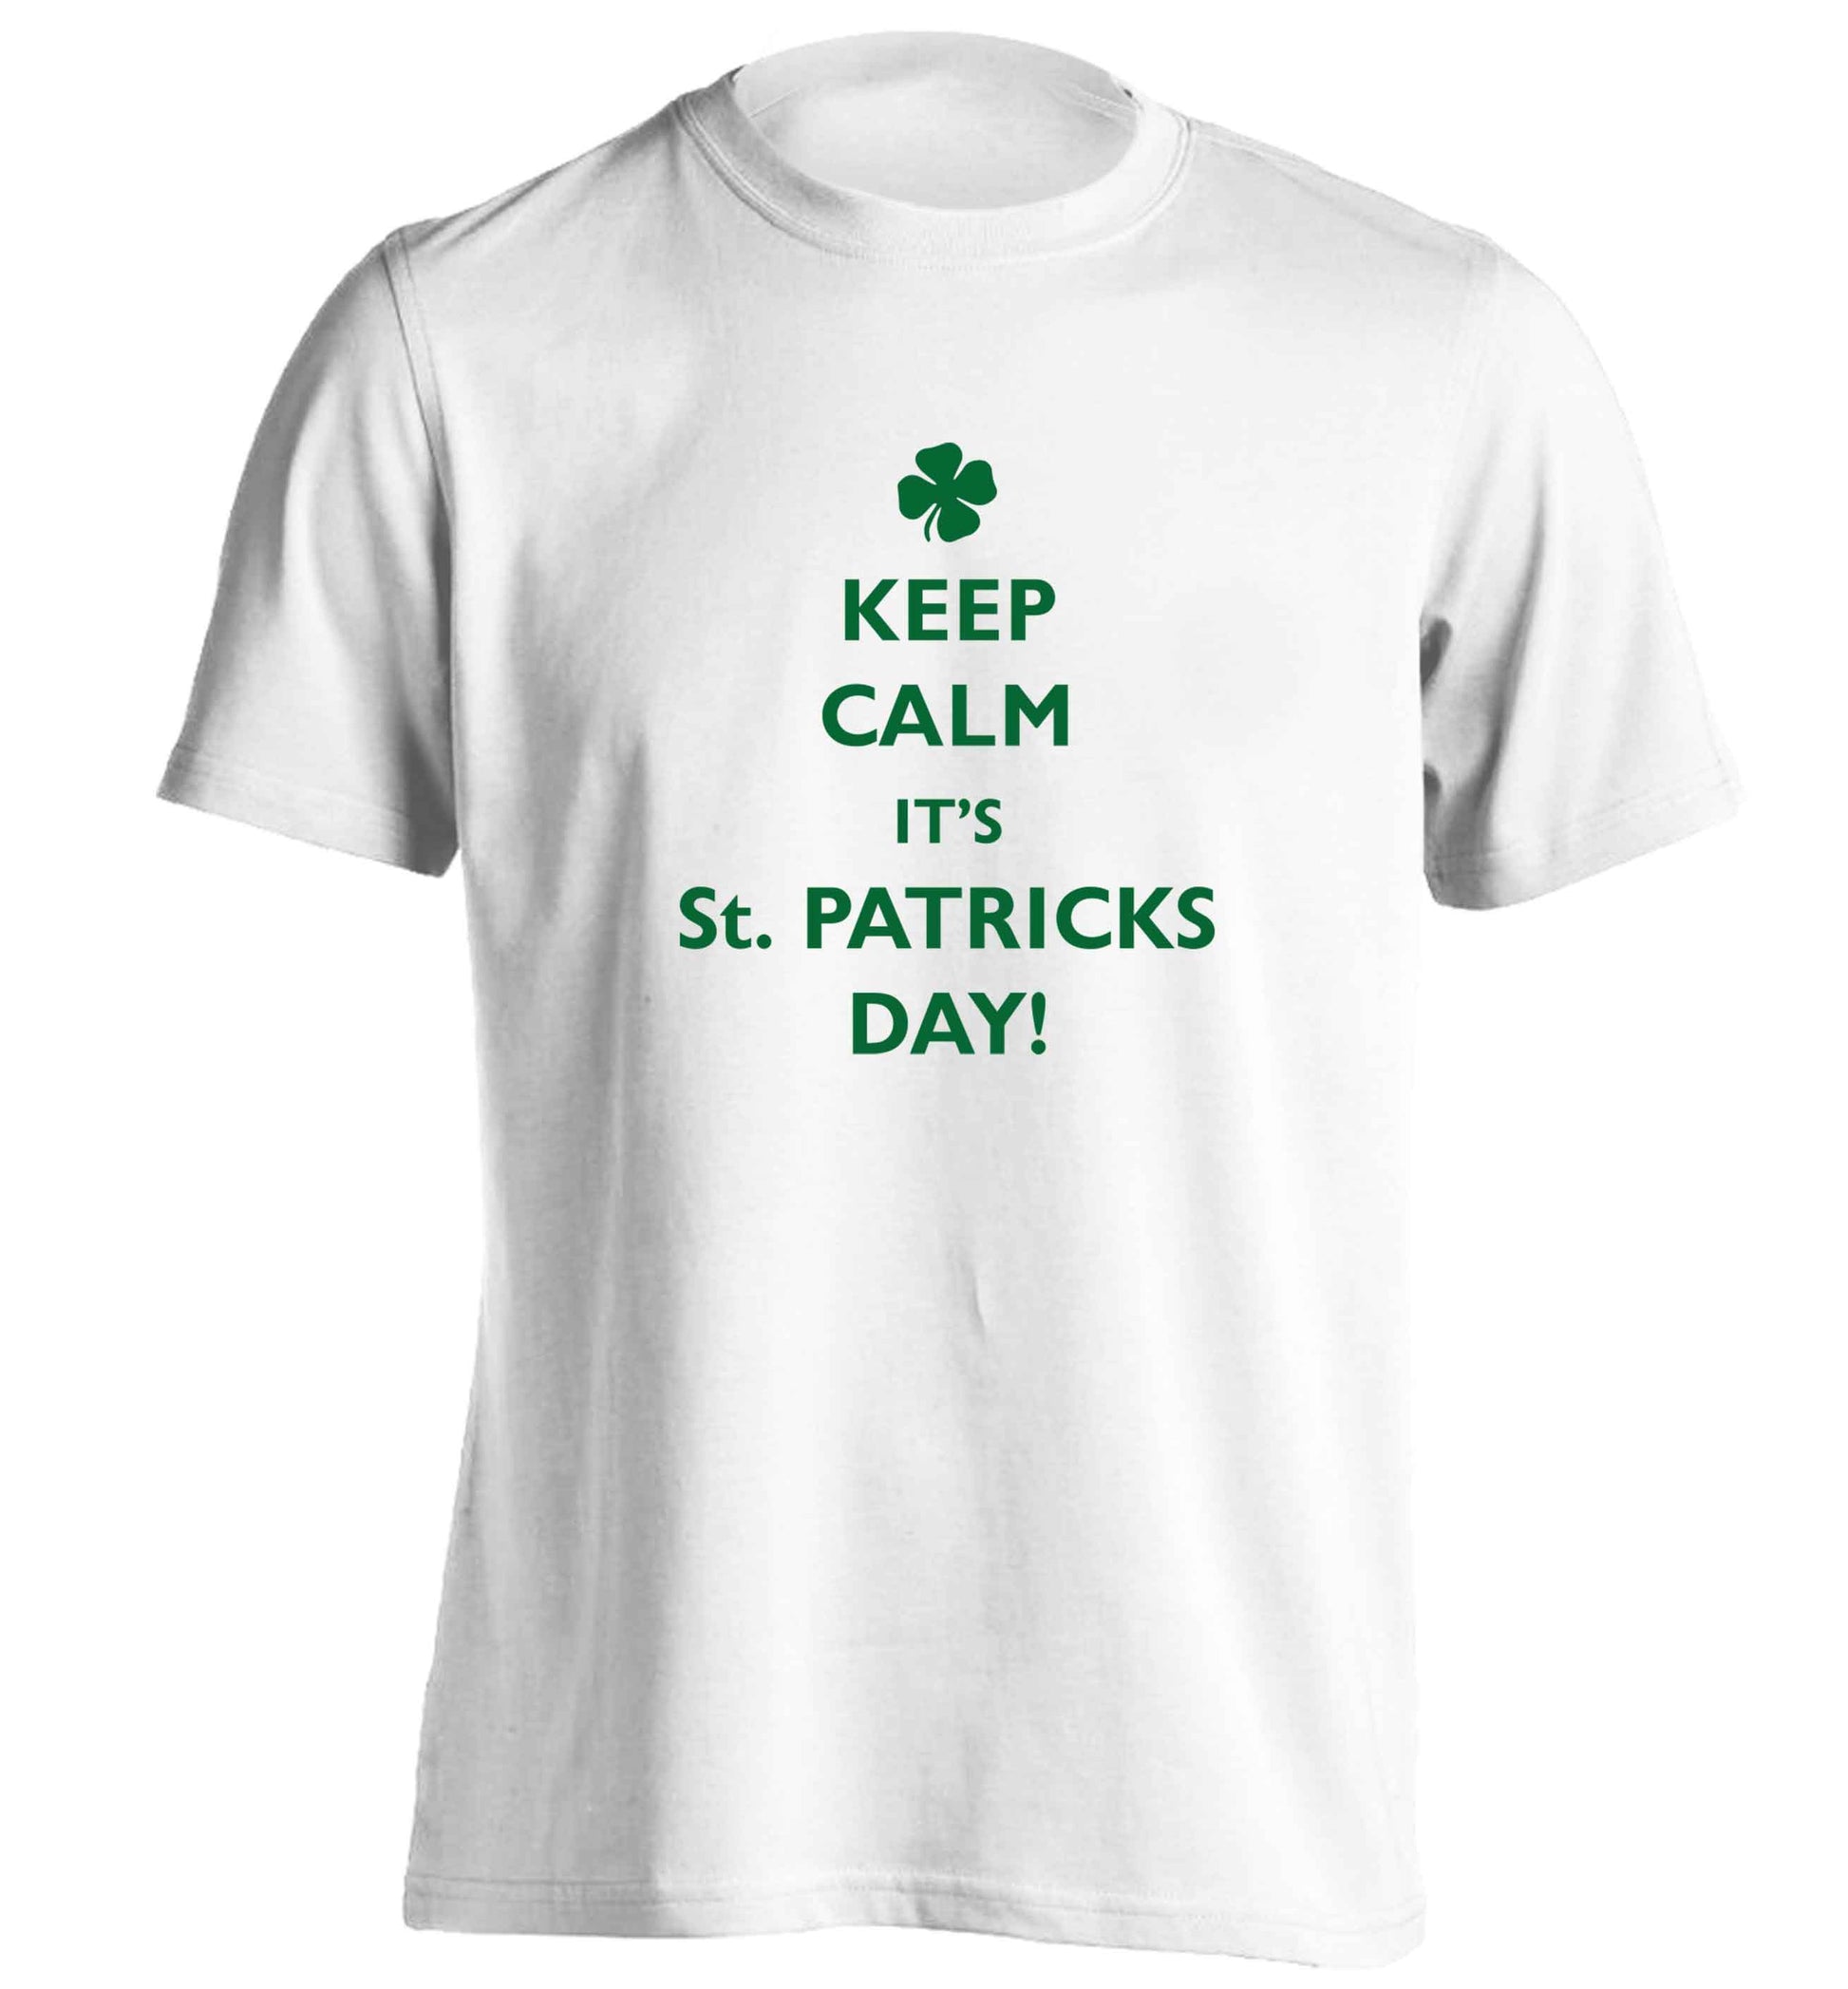 I can't keep calm it's St.Patricks day adults unisex white Tshirt 2XL